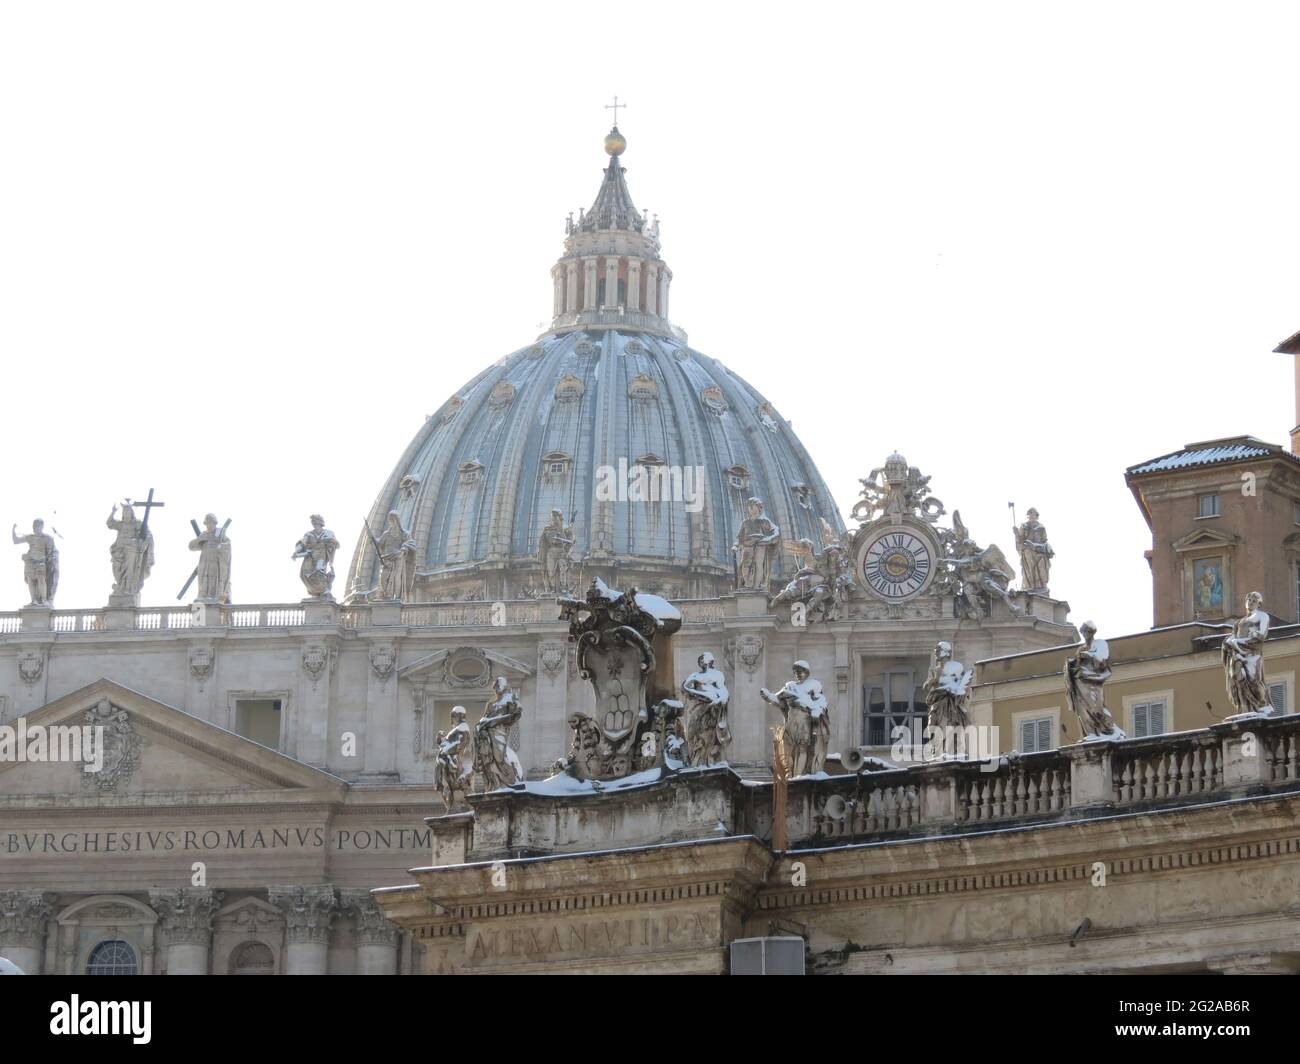 Dome and statues covered with snow in Saint Peter's Place, Rome, Italy Stock Photo